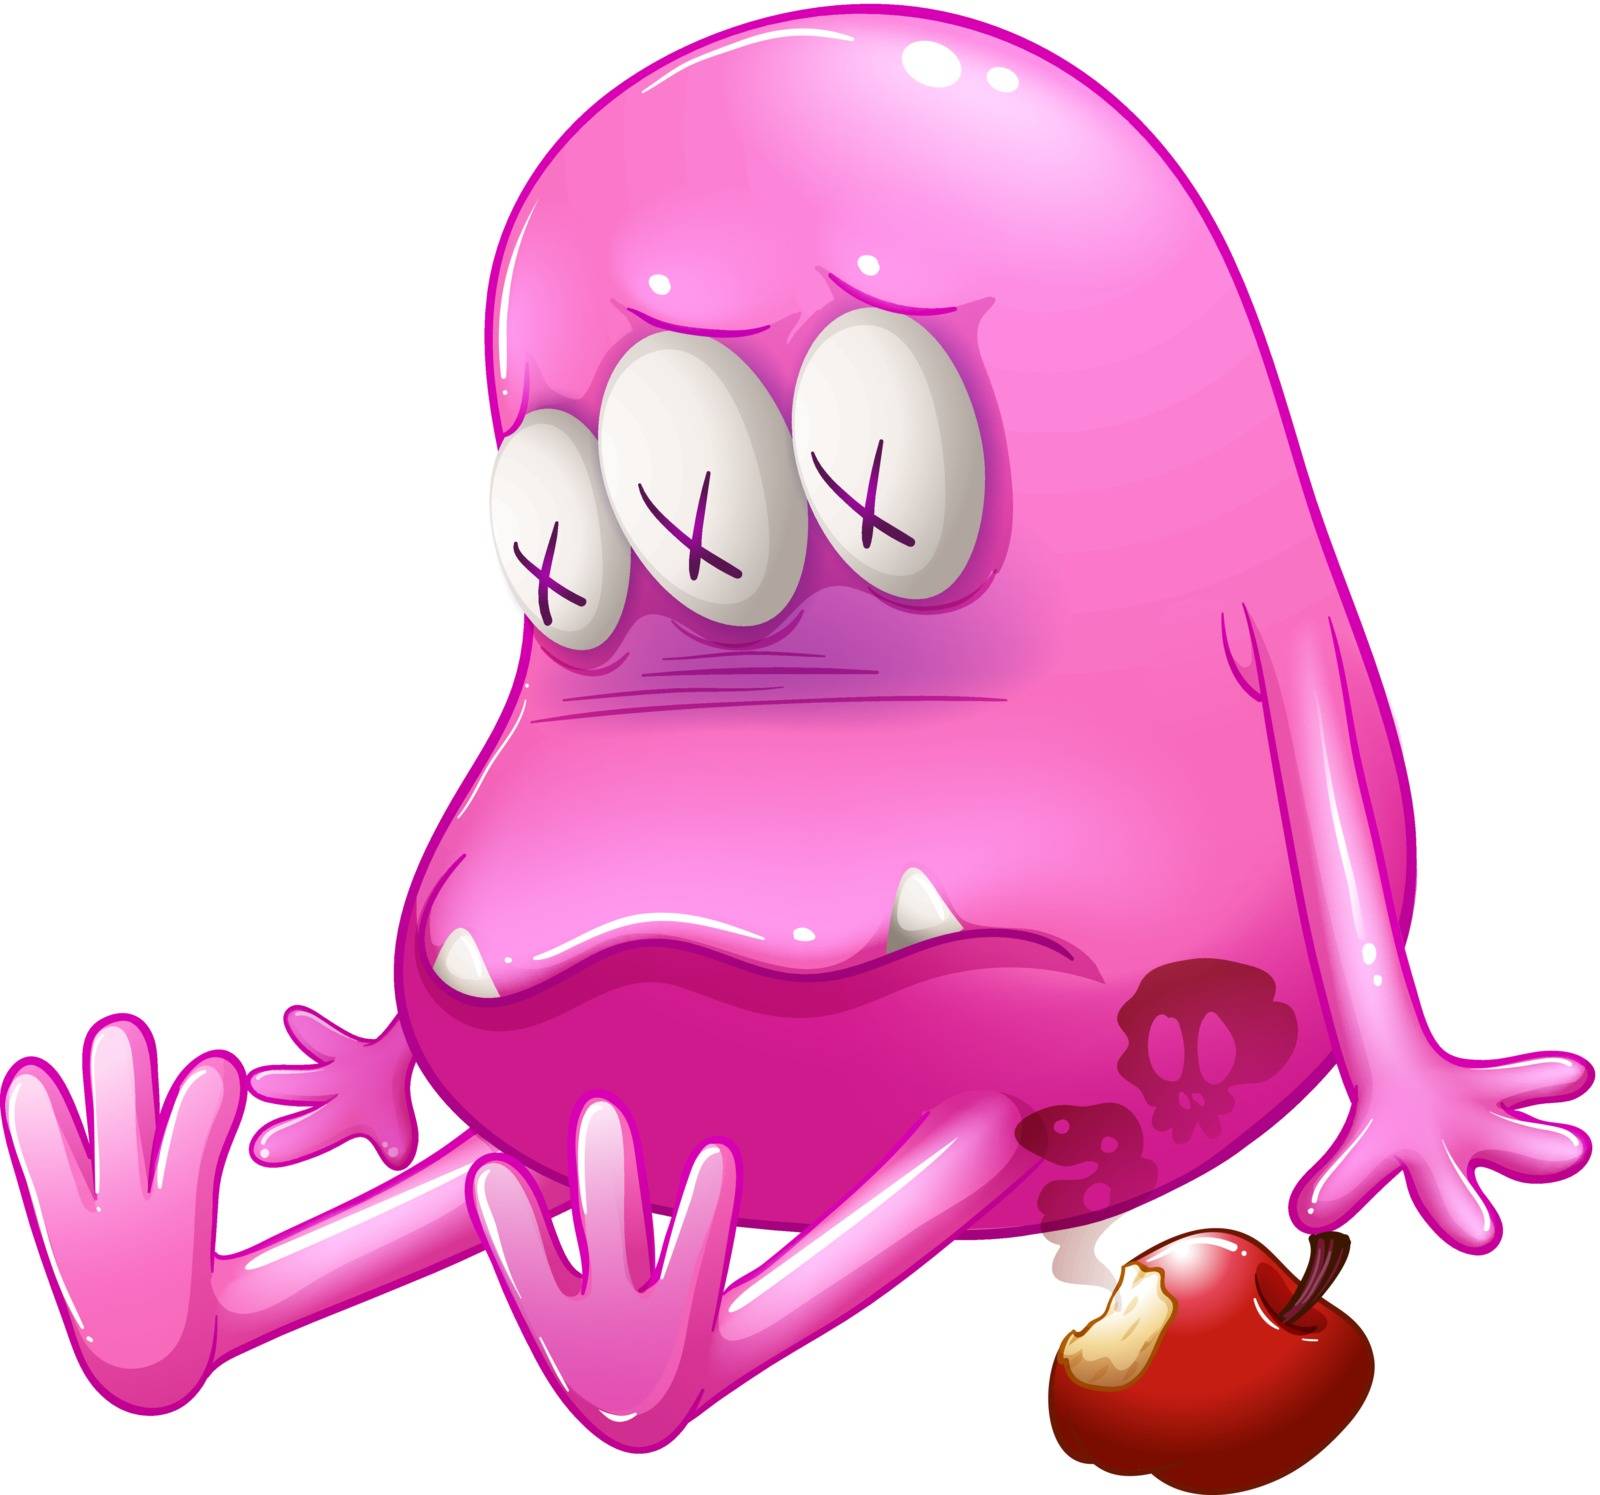 Illustration of a dying pink monster on a white background